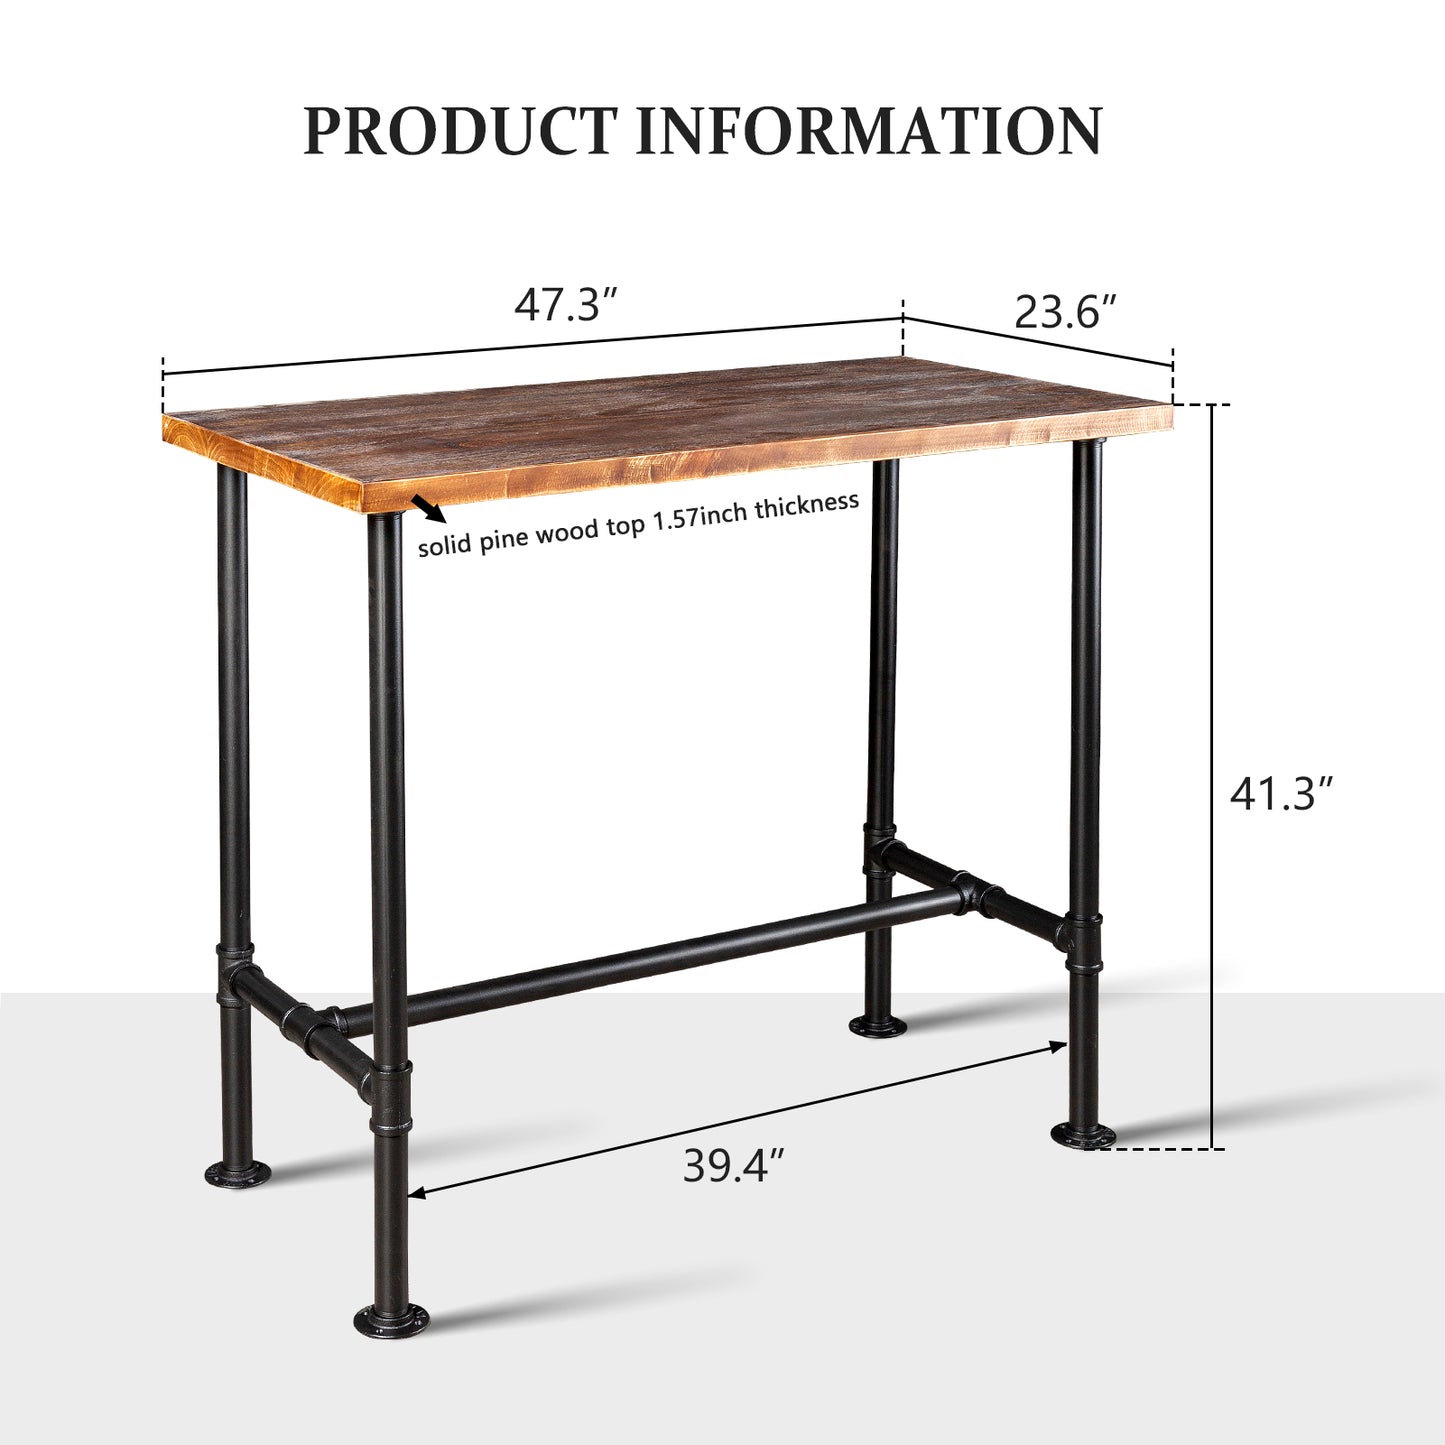 Industrial 41.3inch Height Bar Table Vintage Pipe Design Bistro Table Rustic Kitchen Dining Breakfast Desk Farmhouse Office Computer Desk Wooden Top Pub Coffee Table(Desktop:47.3"*23.6")